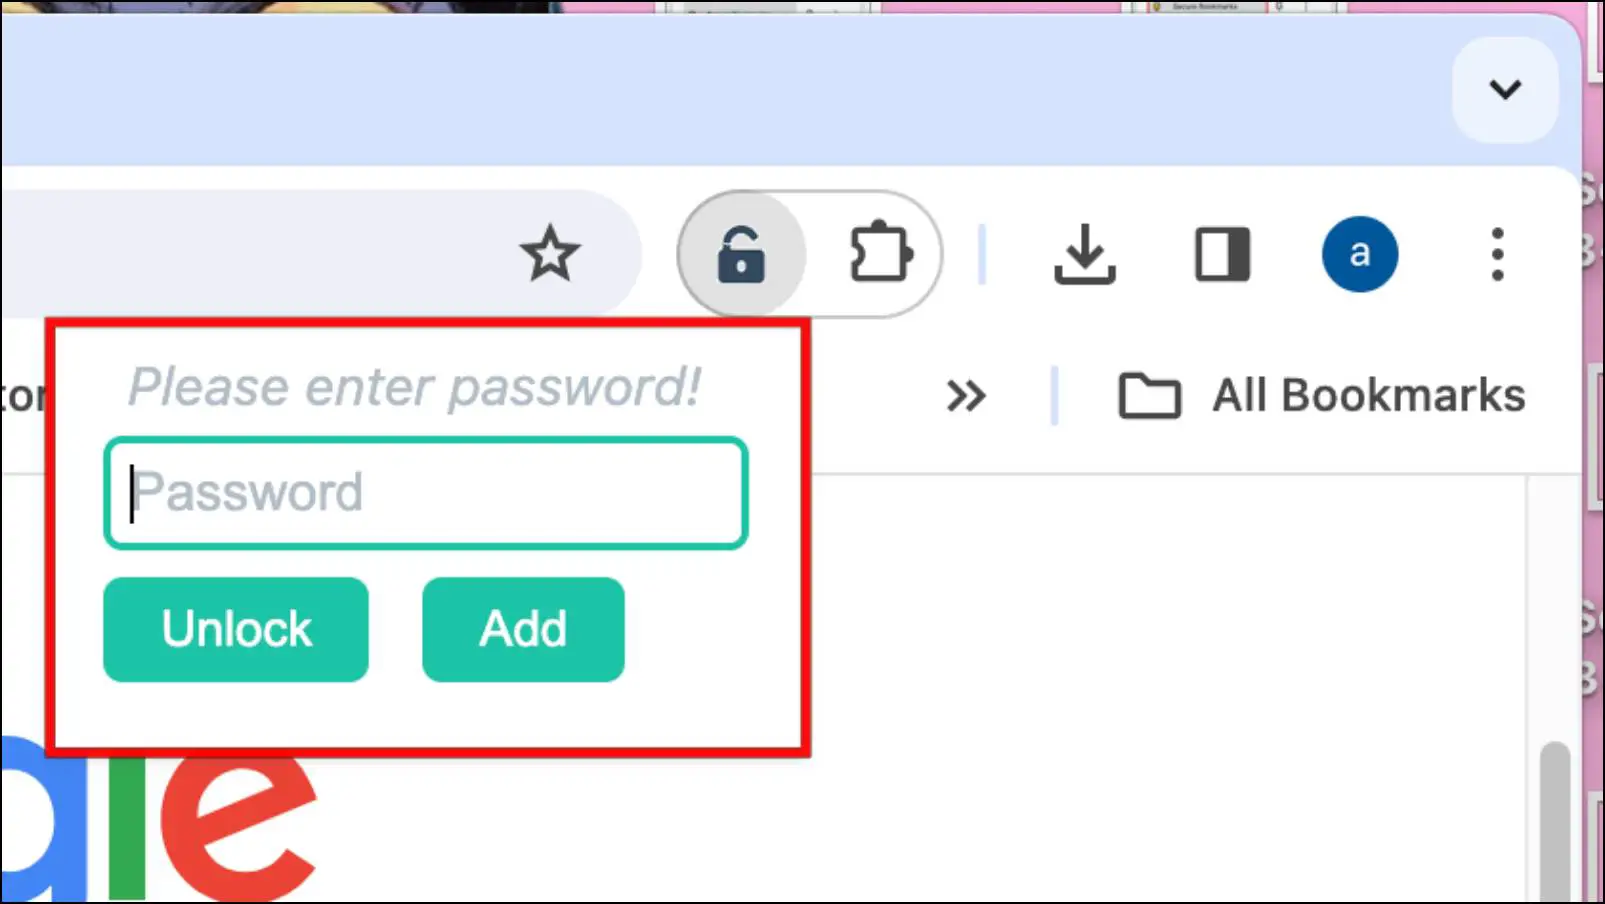 Enter Password and Click on Submit to Access Bookmarks